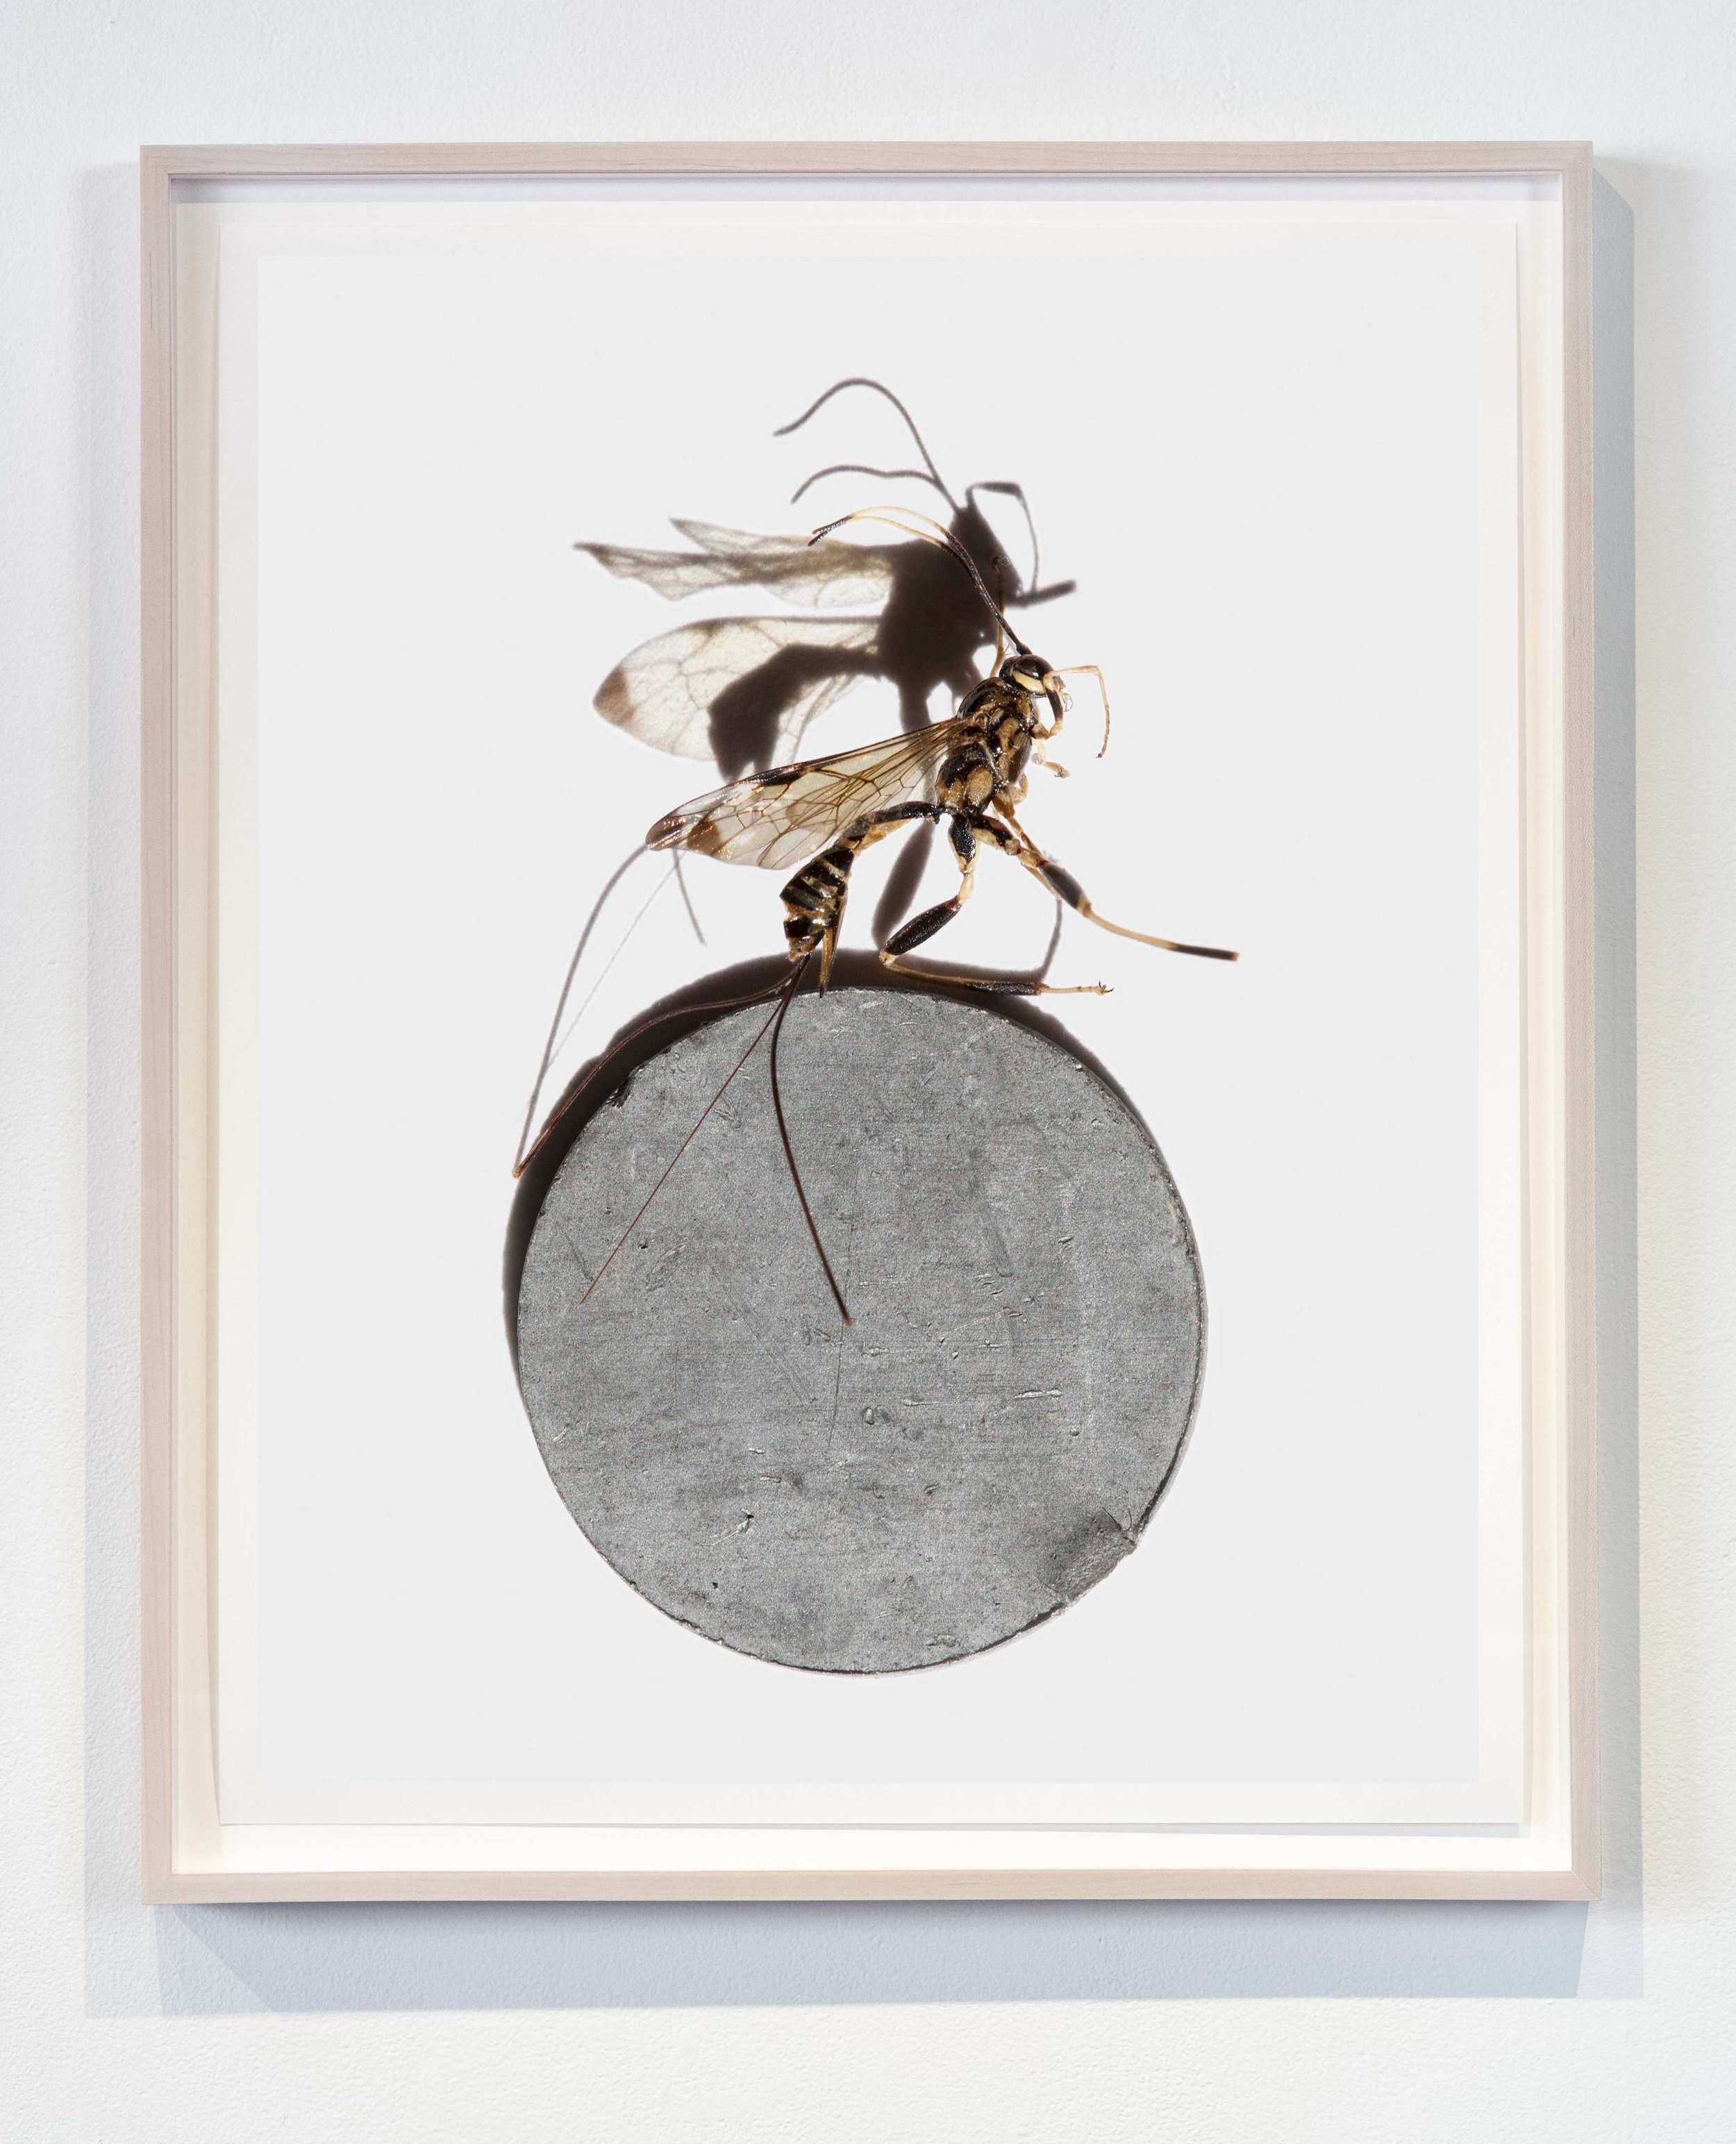  Wasp on Metal  archival pigment print 20x25 inches 